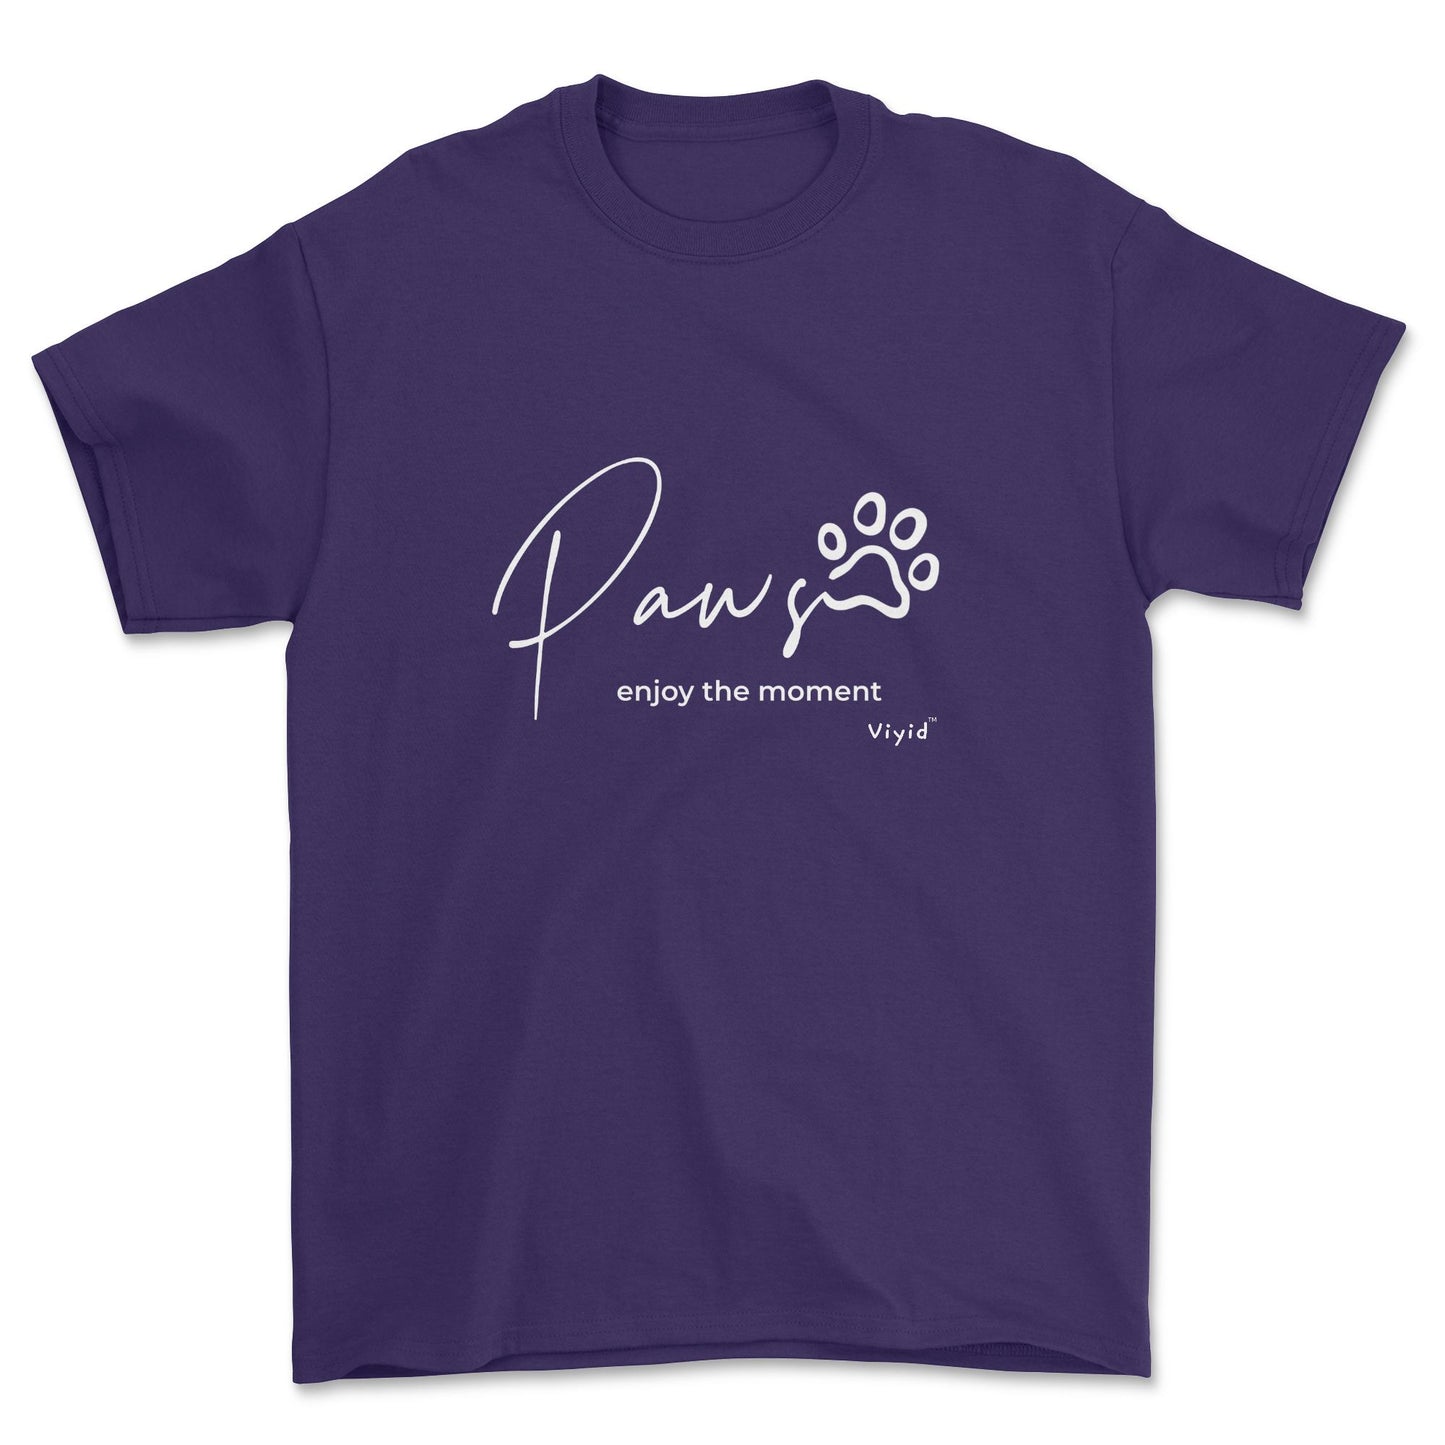 paws enjoy the moment youth t-shirt purple